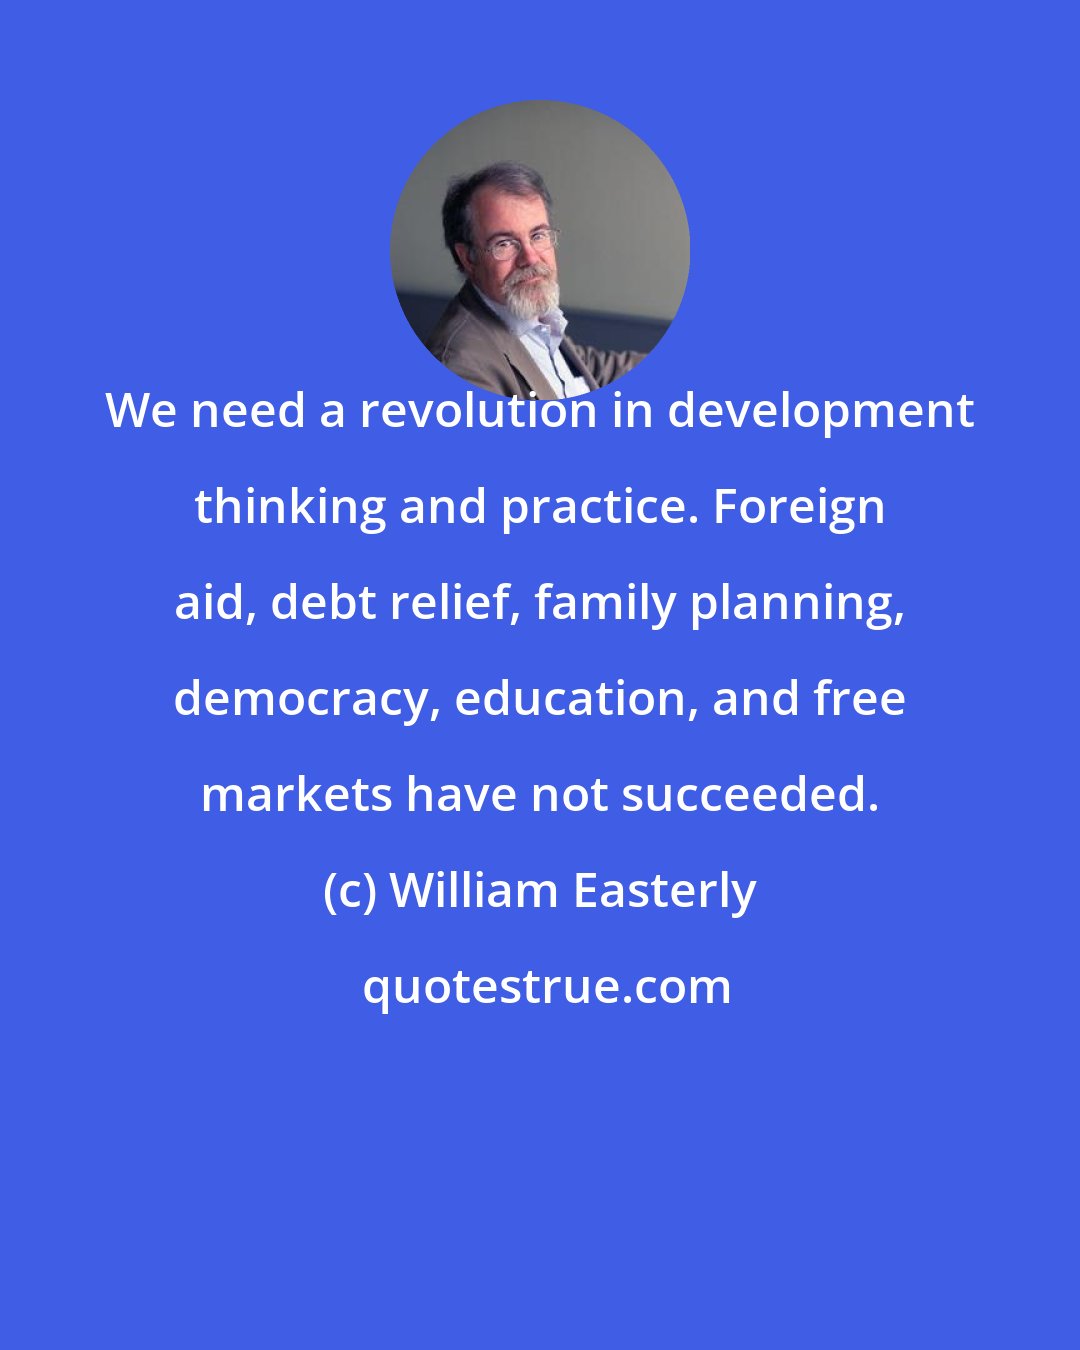 William Easterly: We need a revolution in development thinking and practice. Foreign aid, debt relief, family planning, democracy, education, and free markets have not succeeded.